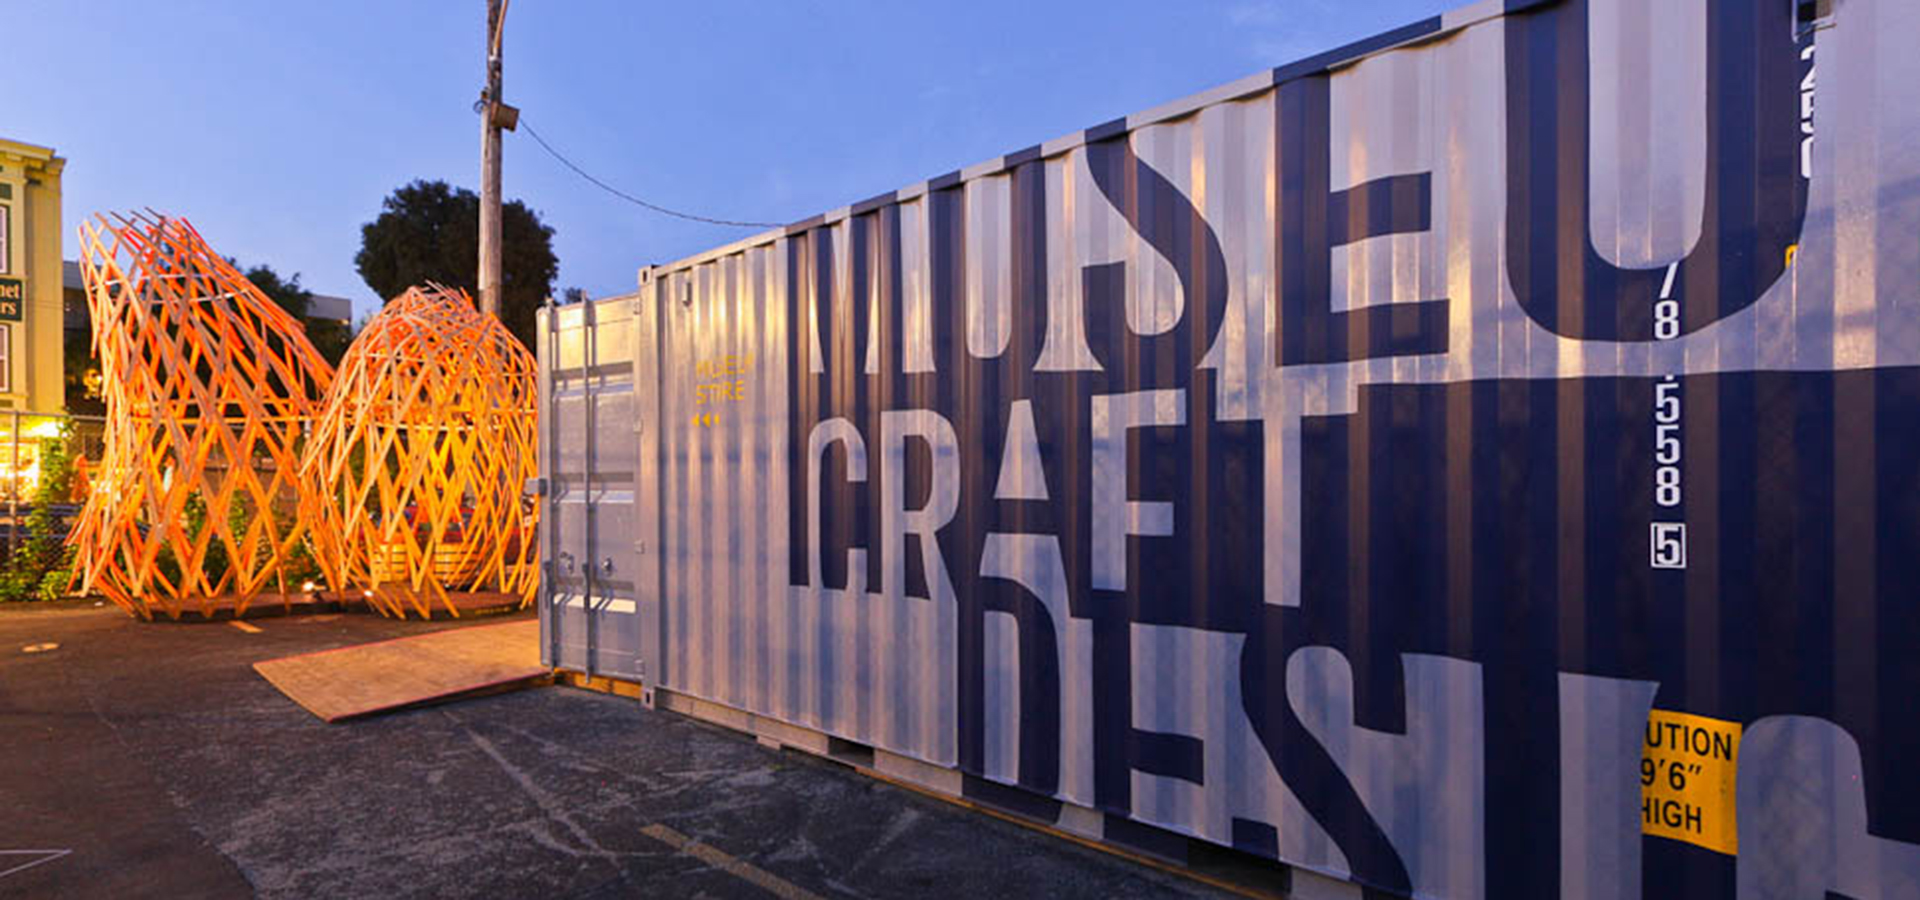 Three vertical wooden lattice structures with a shipping container in front of them with the Museum of Craft and Design's logo on it.